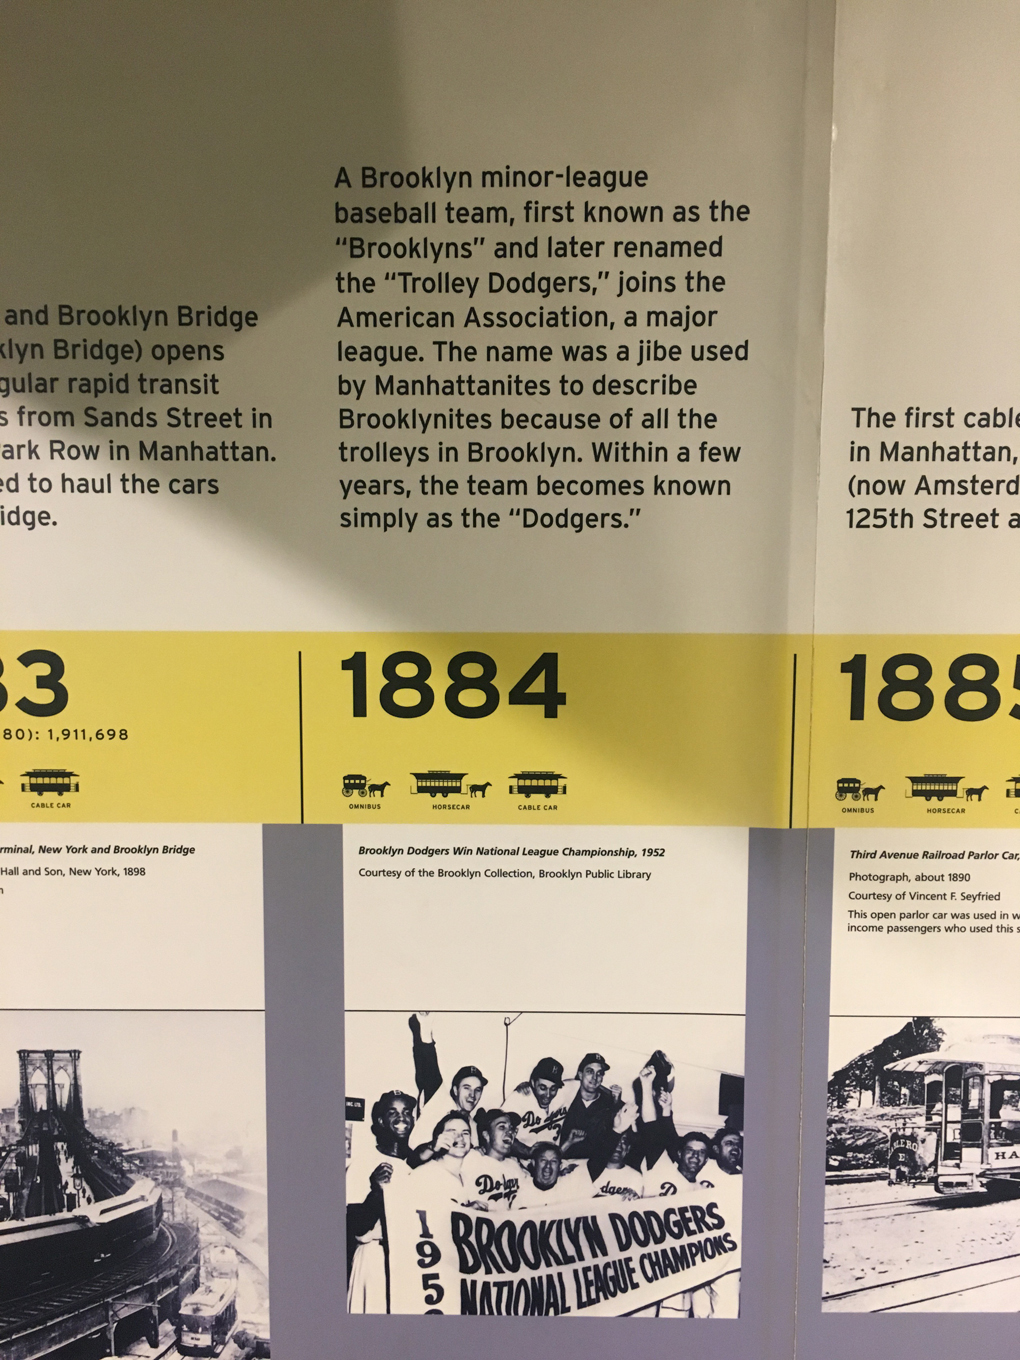 A timeline entry for the New York MTA describing how Broolynites' propensity for fare-dodging on trams meant the Brooklyn baseball team were named 'The Dodgers'